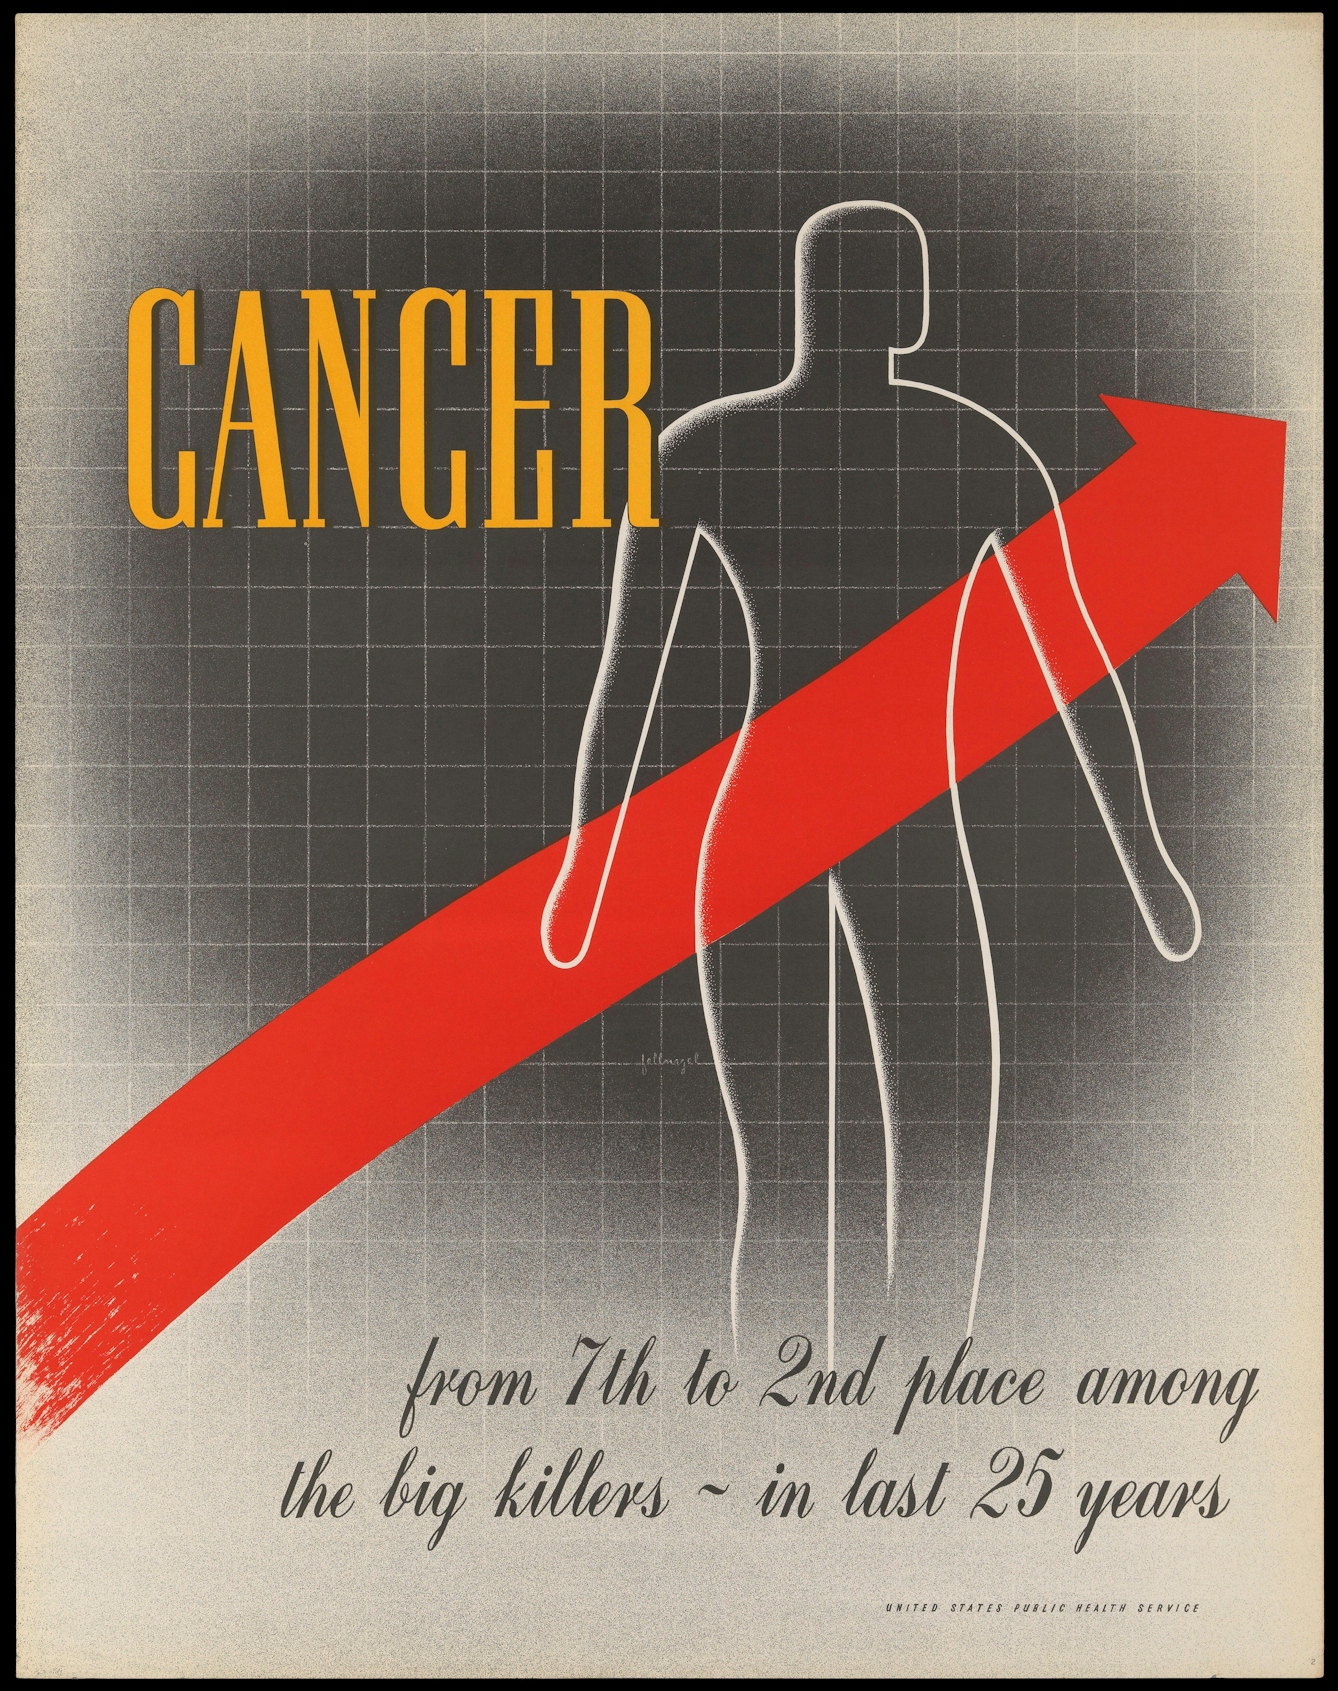 A graphic of a red arrow on a graph pointing upwards through a human body, representing the increase in cancer in the USA